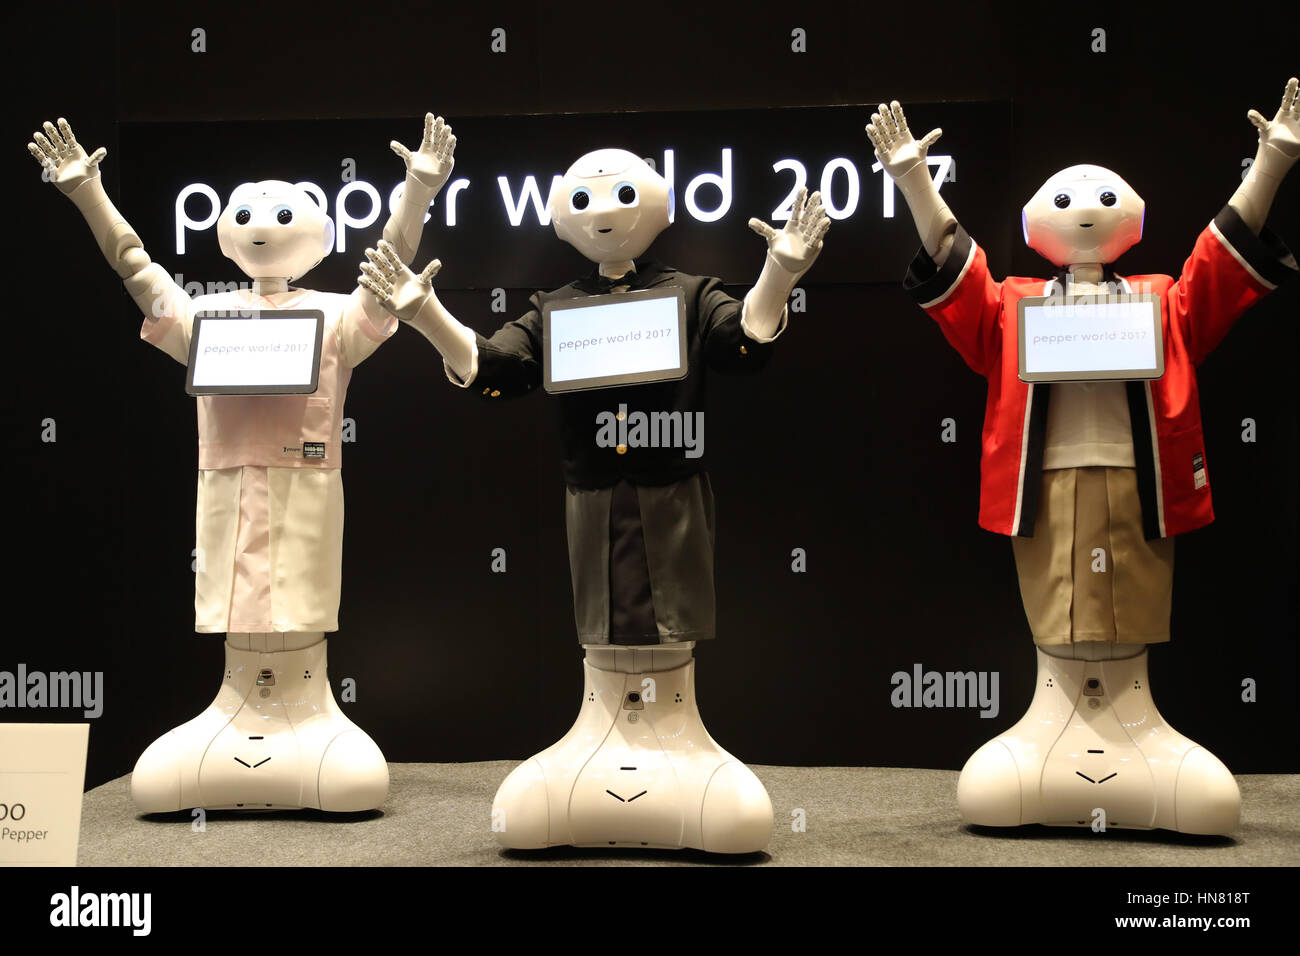 Tokyo, Japan. 9th Feb, 2017. Softbank's humanoid robot Pepper gesture to greet visitors at the Pepper World exhibition in Tokyo on Thursday, February 9, 2017. Pepper with airline staff uniform won the competition, while nurse costume won the judges' special award. Credit: Yoshio Tsunoda/AFLO/Alamy Live News Stock Photo